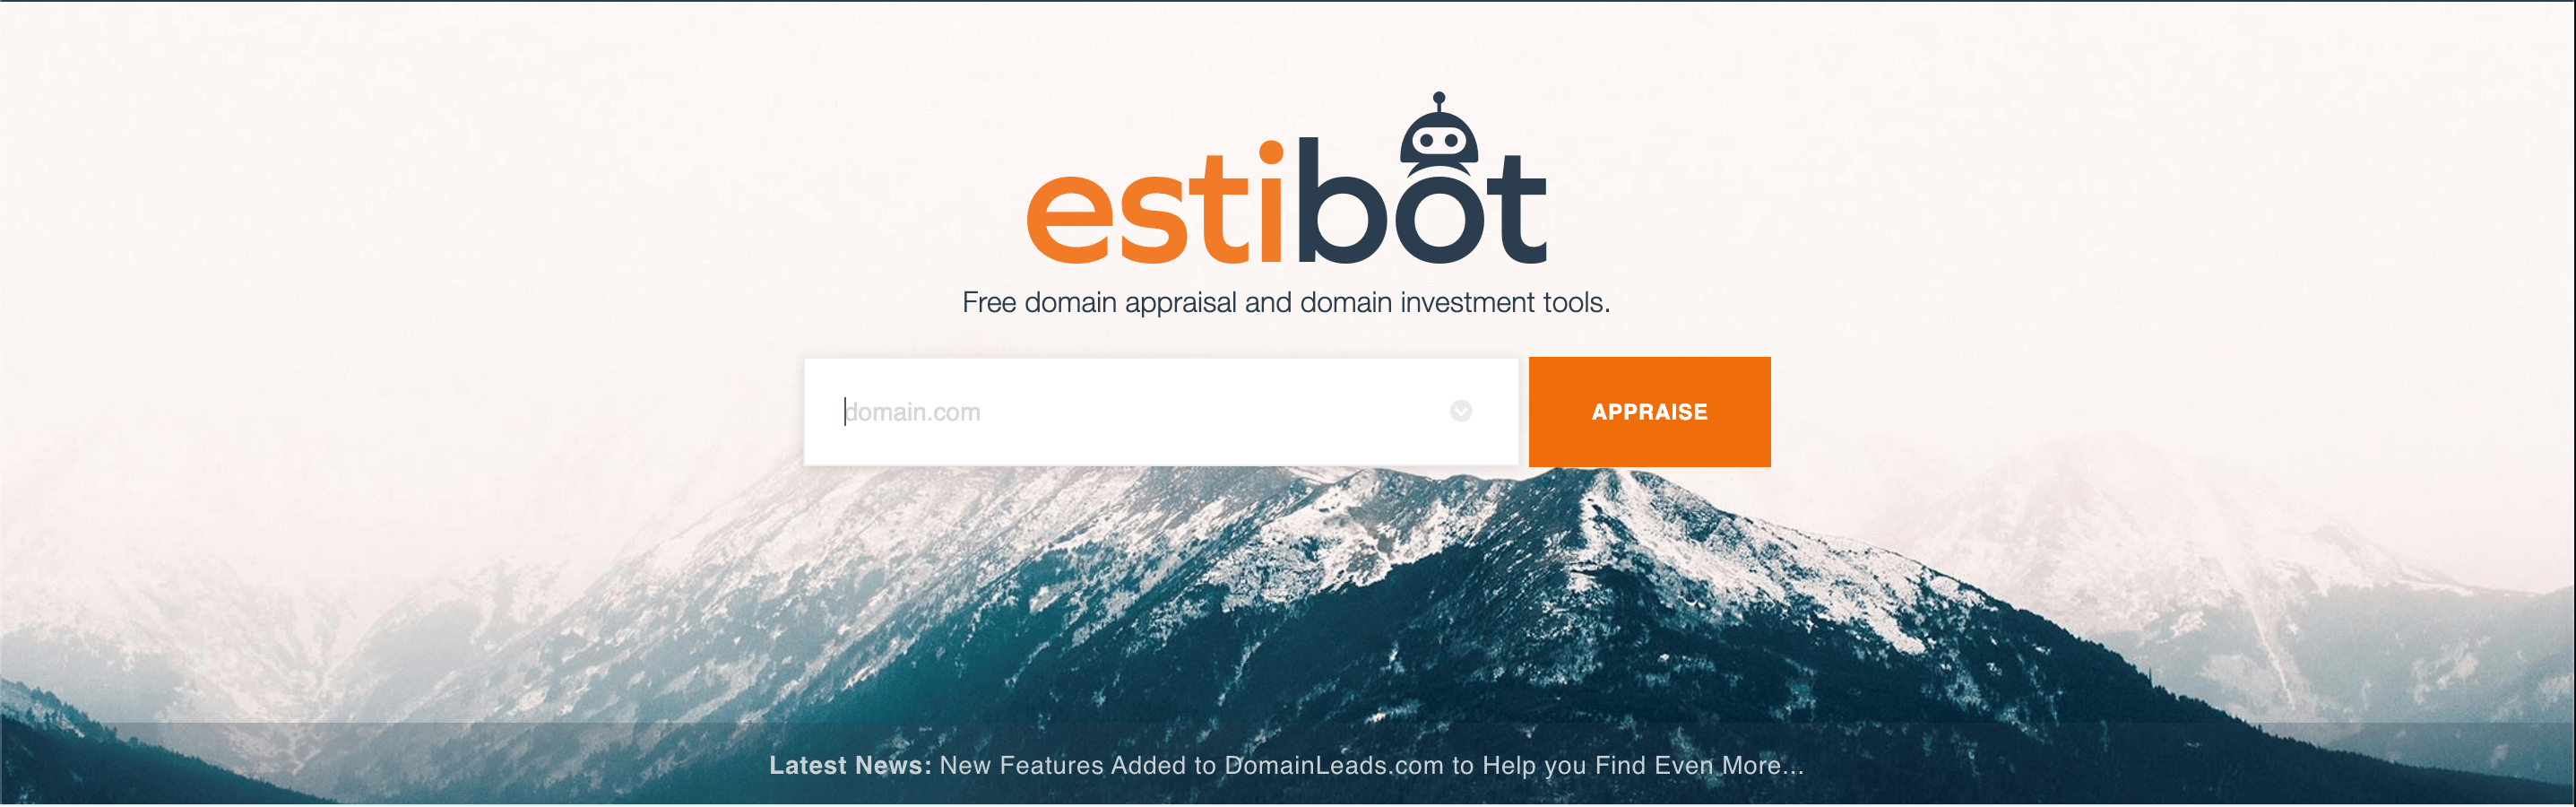 Estibot's home page